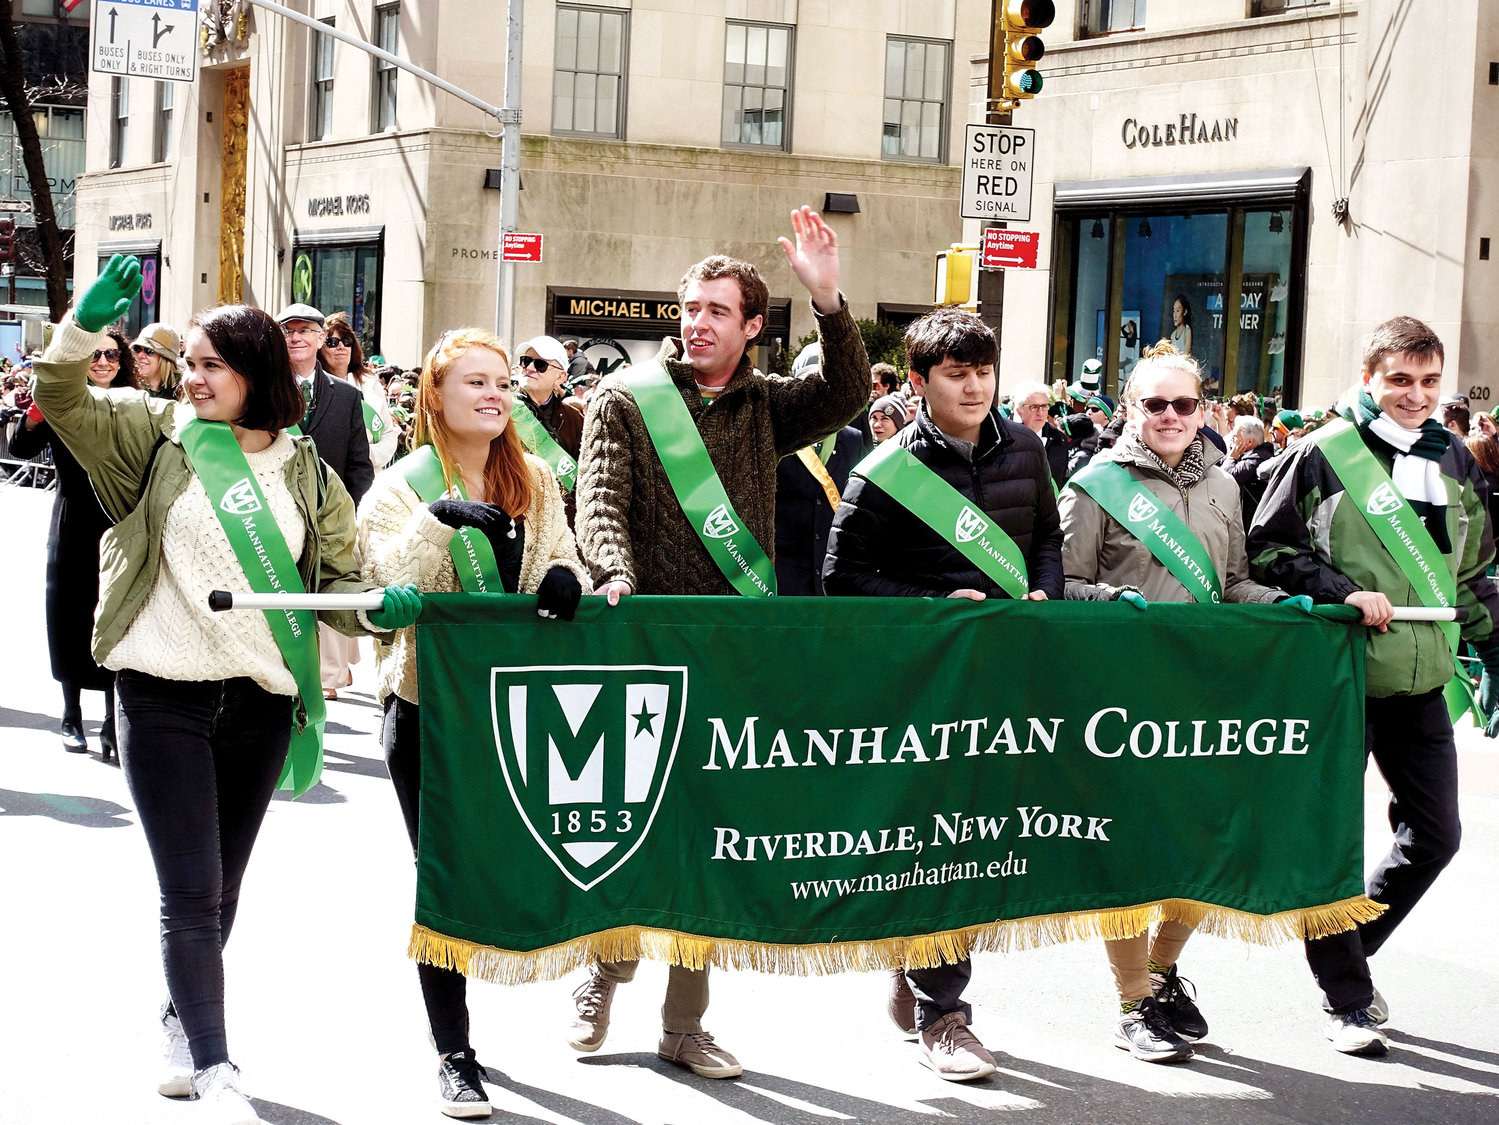 Students from Manhattan College stride with smiles on their faces during the 258th New York City St. Patrick's Day Parade on Fifth Avenue last March.